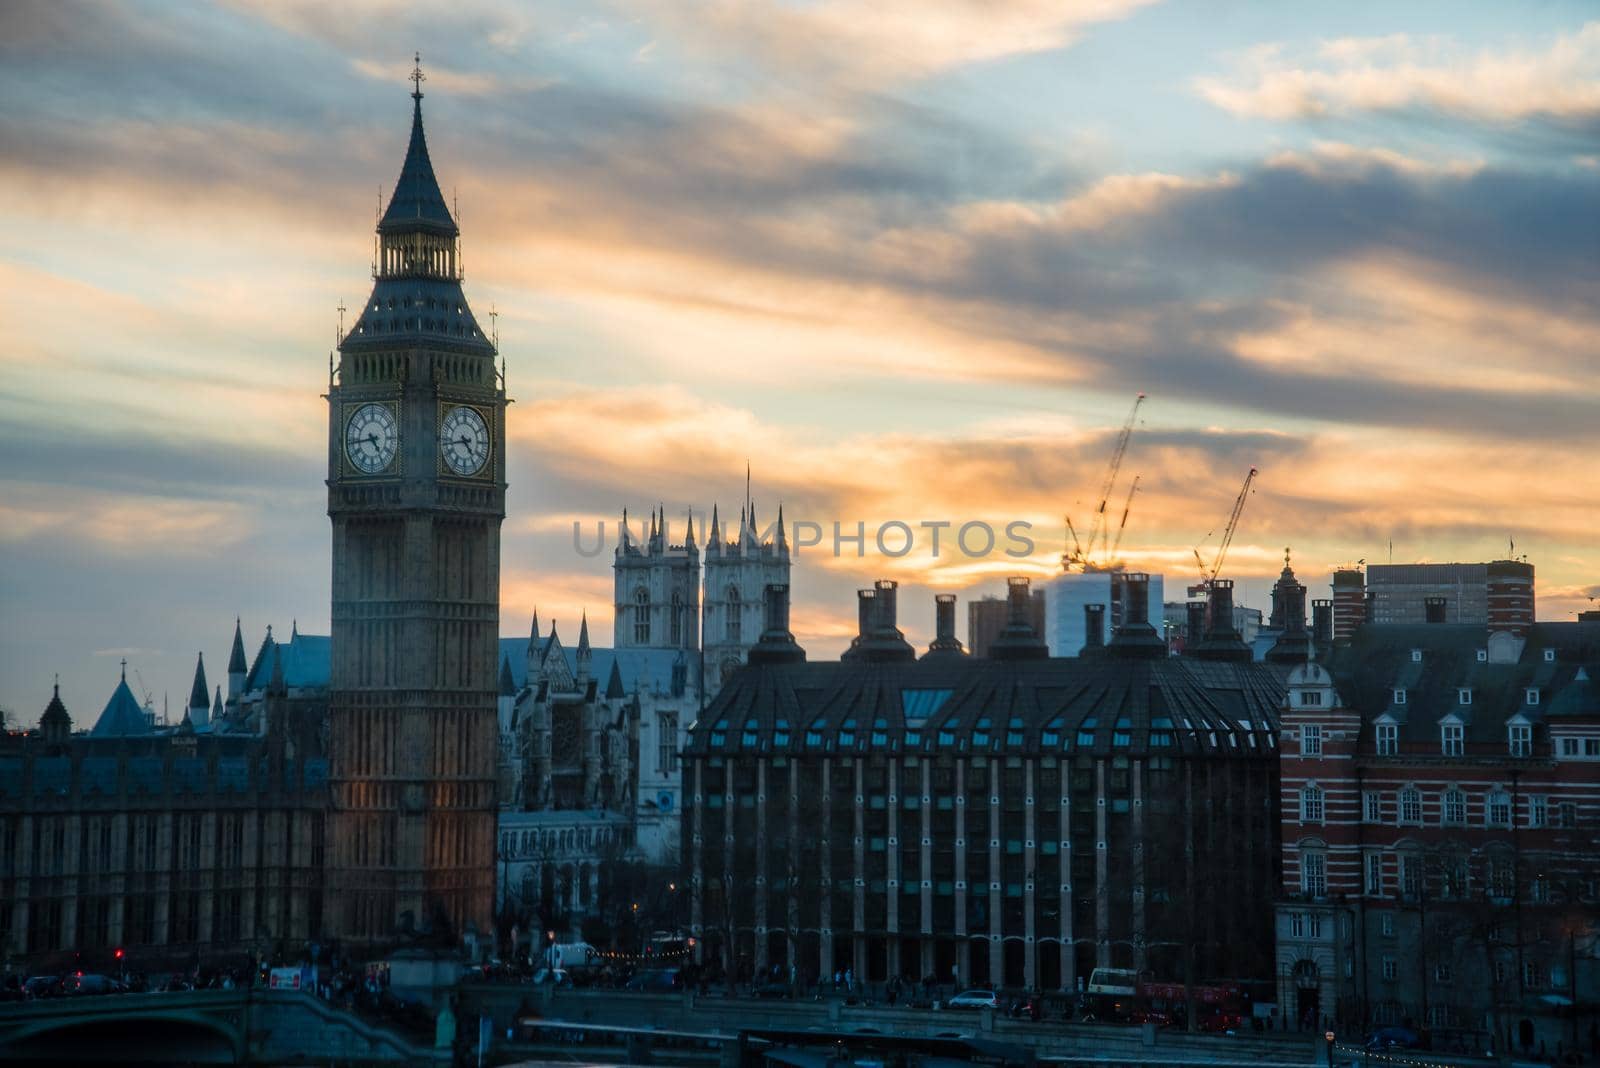 Big Ben Clock tower of London Parliament with a heavenly blue and yellow sunset. by jyurinko